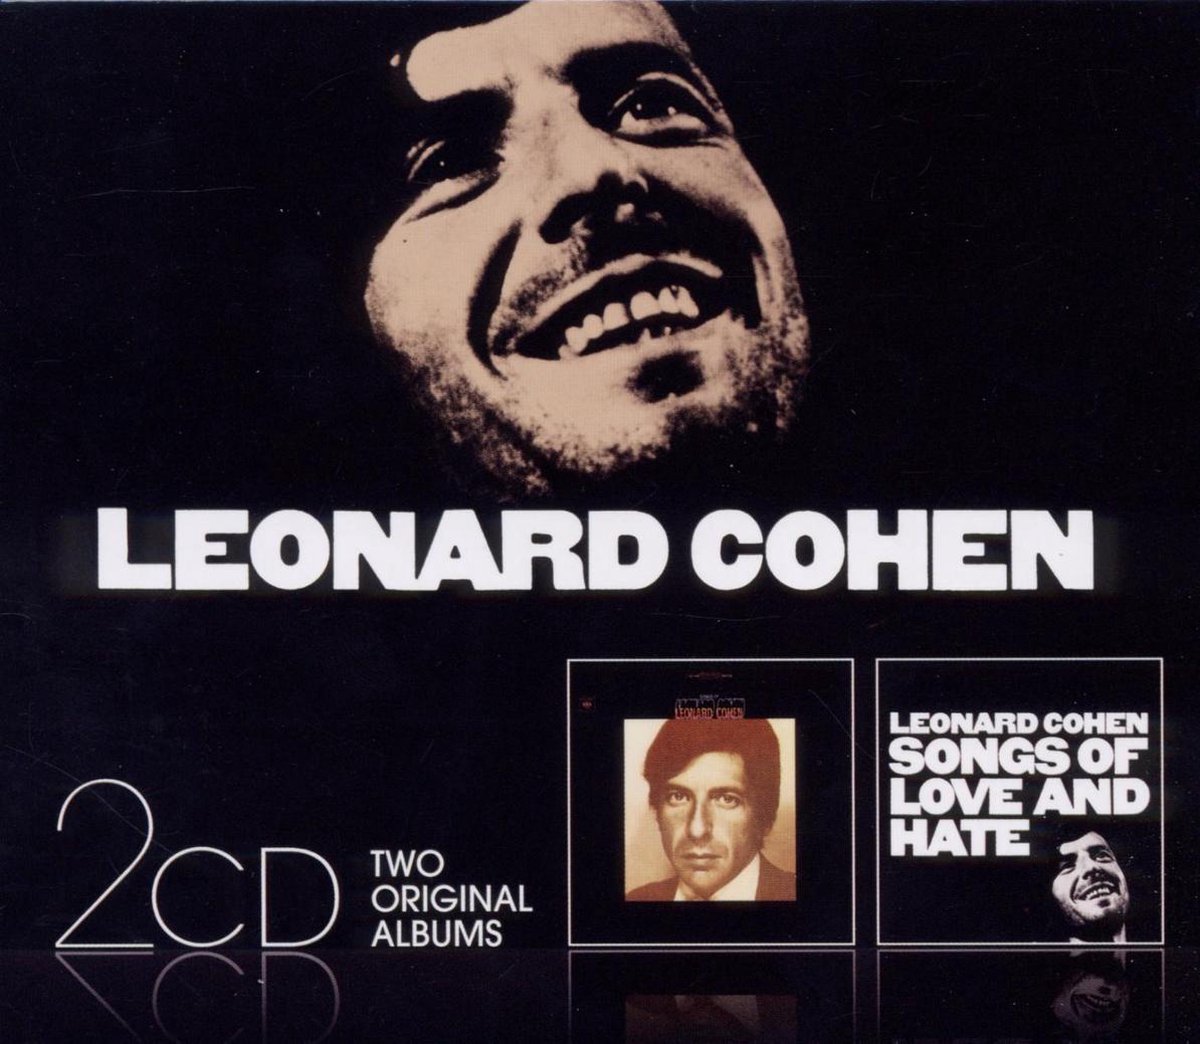 Songs of Leonard Cohen. Songs of Love and Hate | Leonard Cohen and poza noua